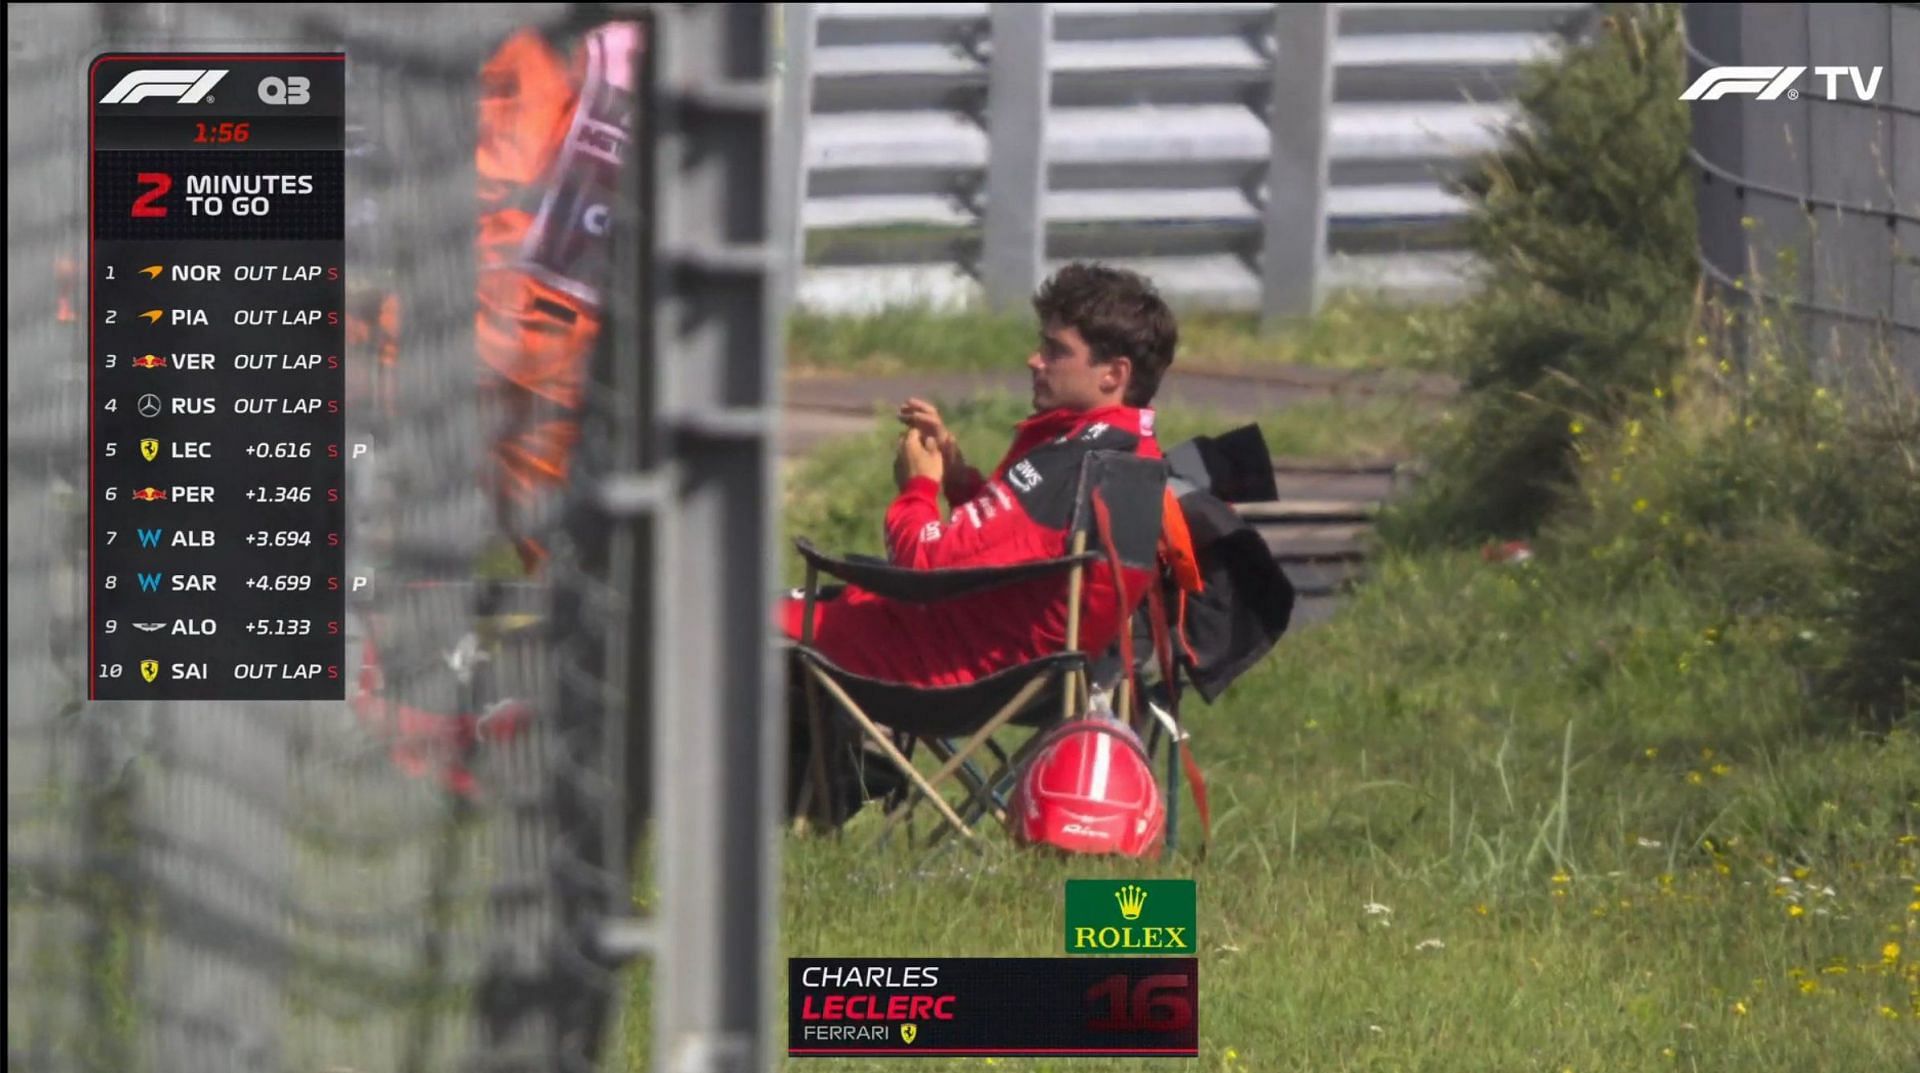 Charles Leclerc after his crash in qualifying